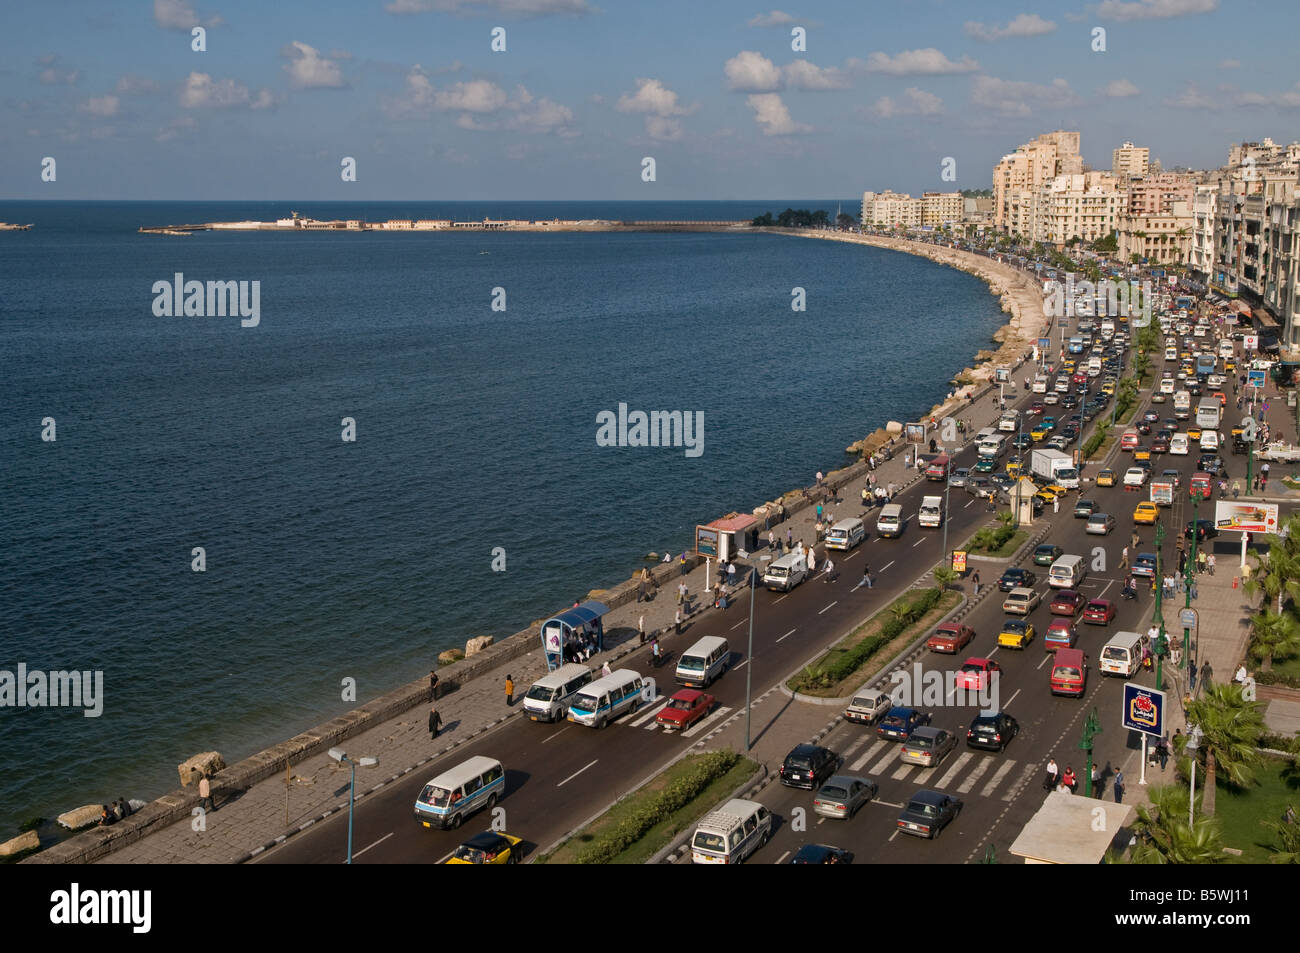 View of the waterfront promenade corniche one of the major corridors for traffic in the city of Alexandria Egypt Stock Photo